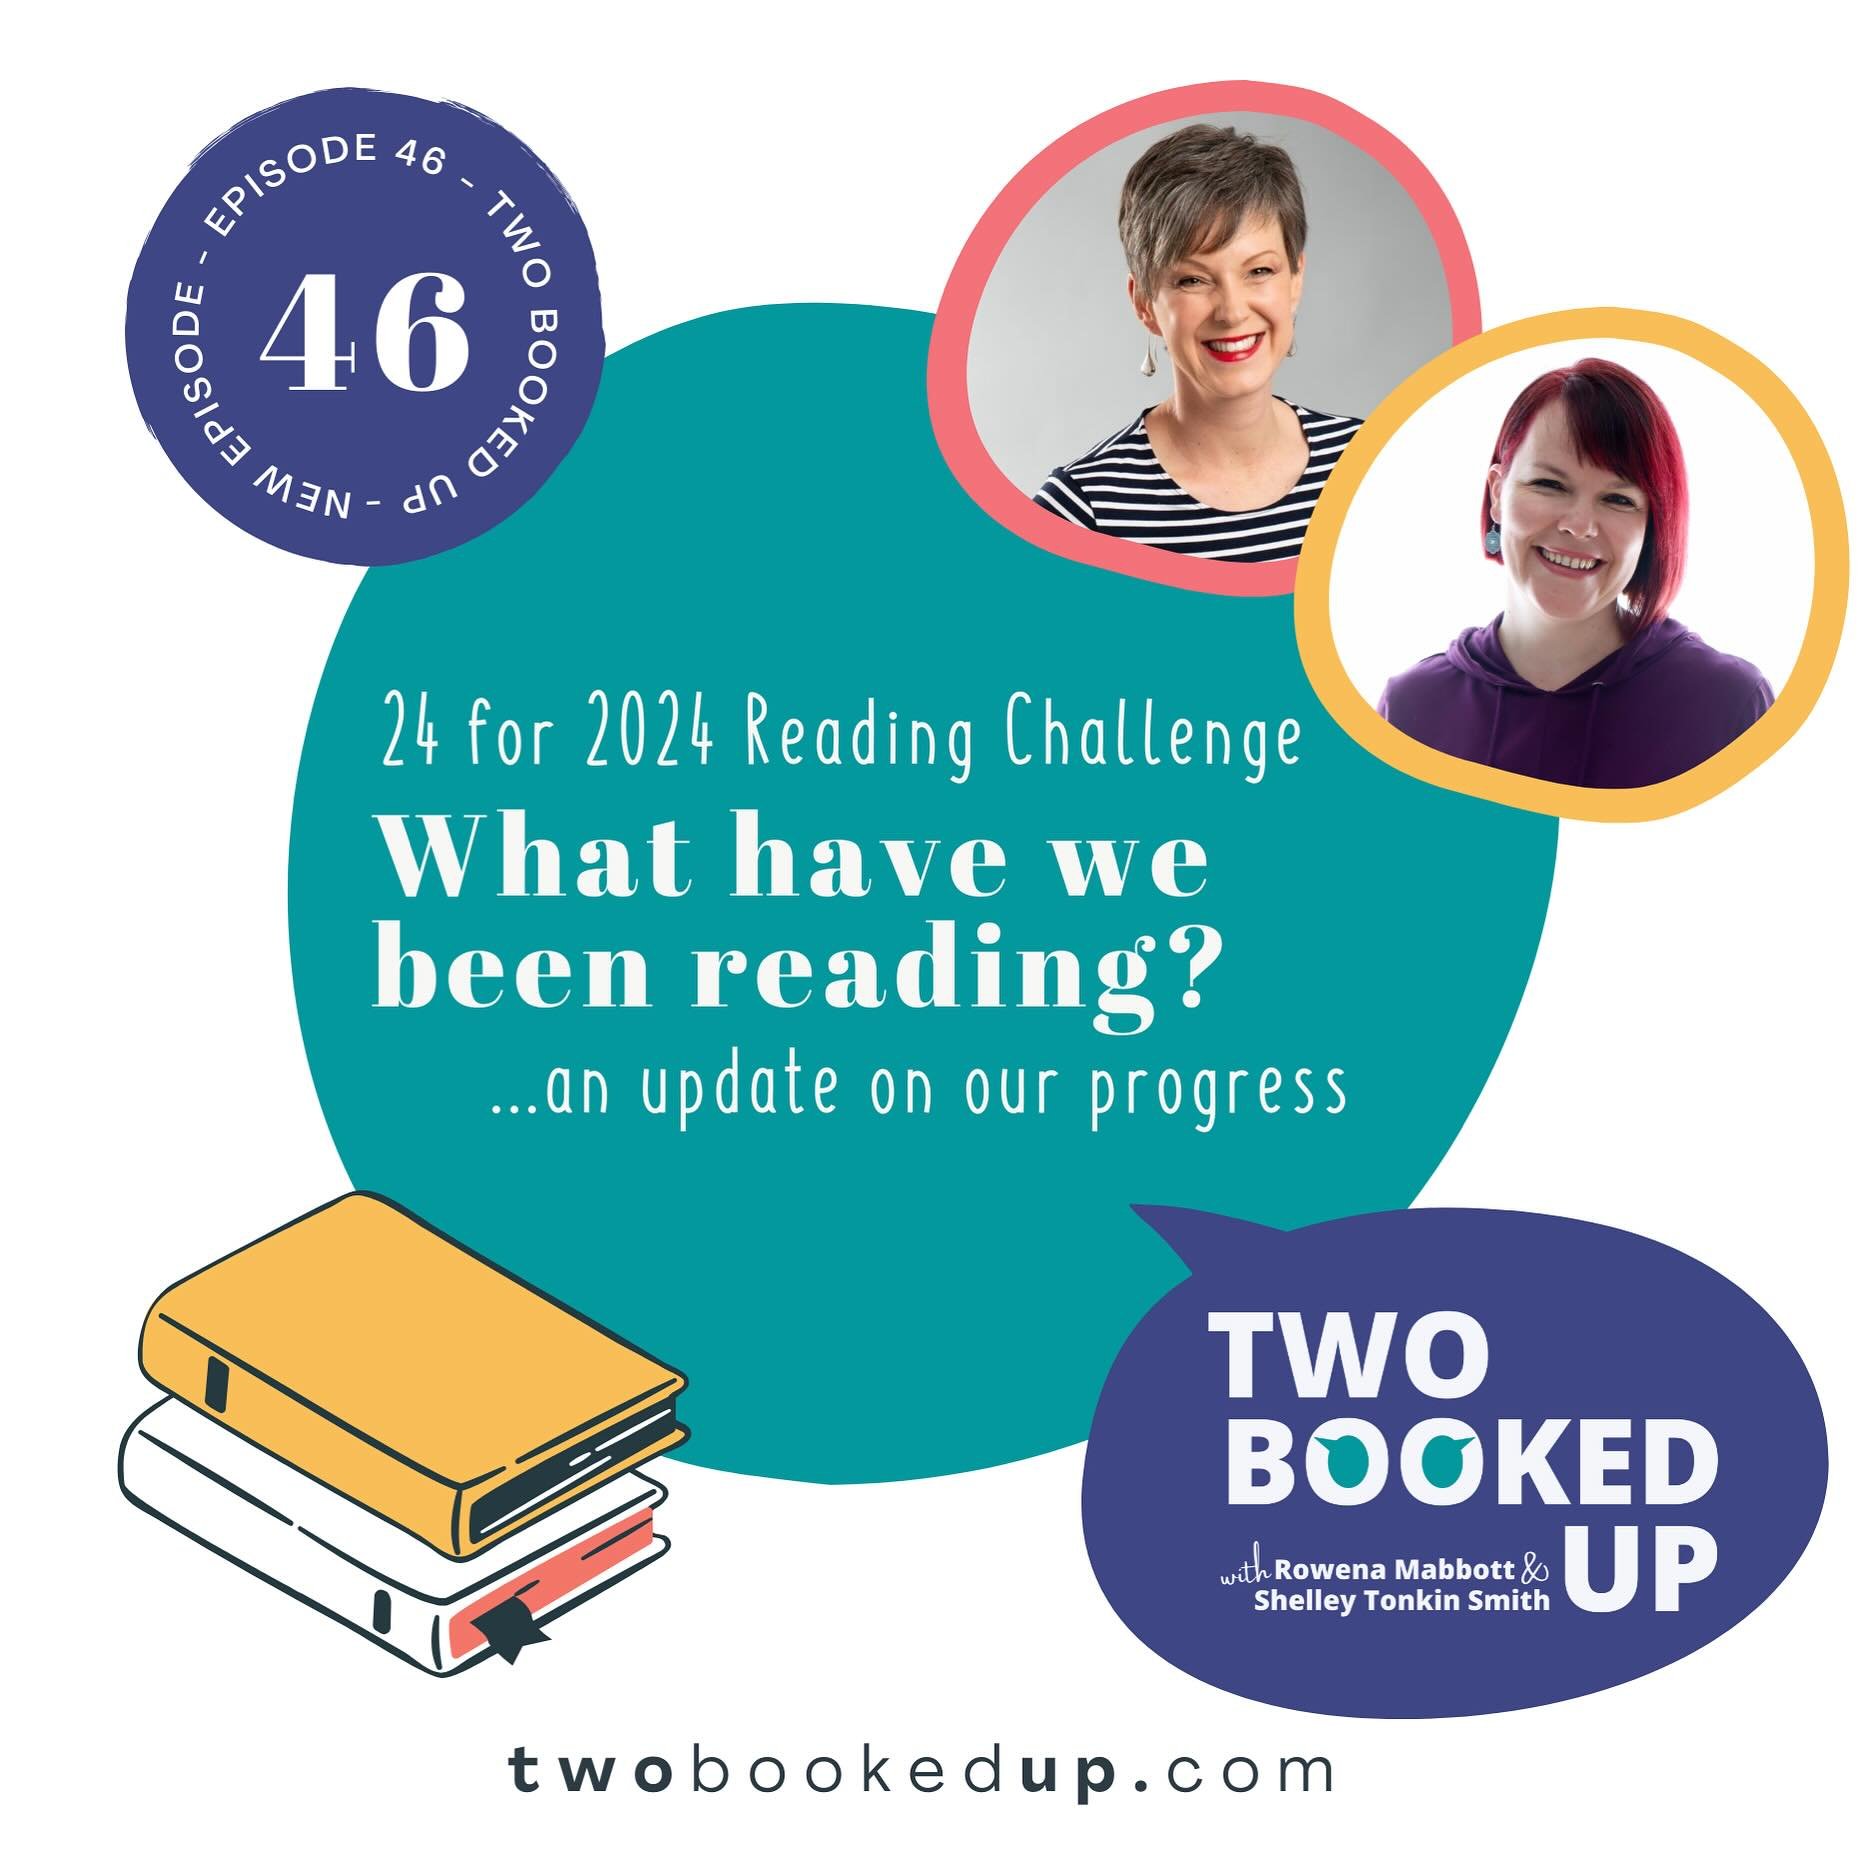 In this episode, Rowena and Shelley are discussing the books they&rsquo;ve been reading, and checking in on their progress for the 24 for 2024 Reading Challenge. 📖

The Challenge adds more purpose and variety to non-fiction reading choices and aims 